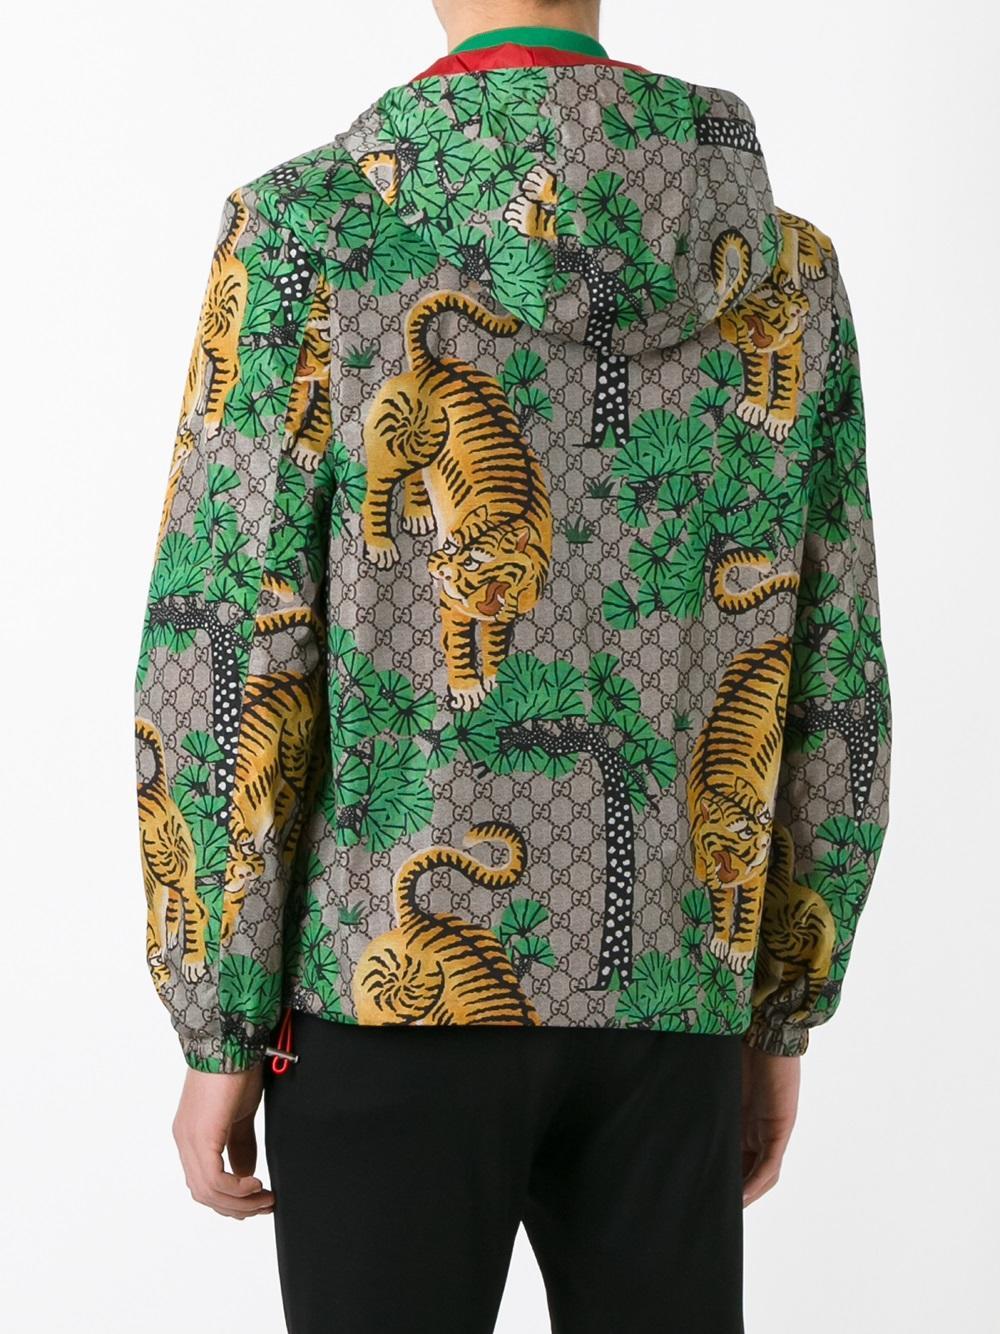 Lyst - Gucci Printed Bengal Hoodie Jacket in Green for Men